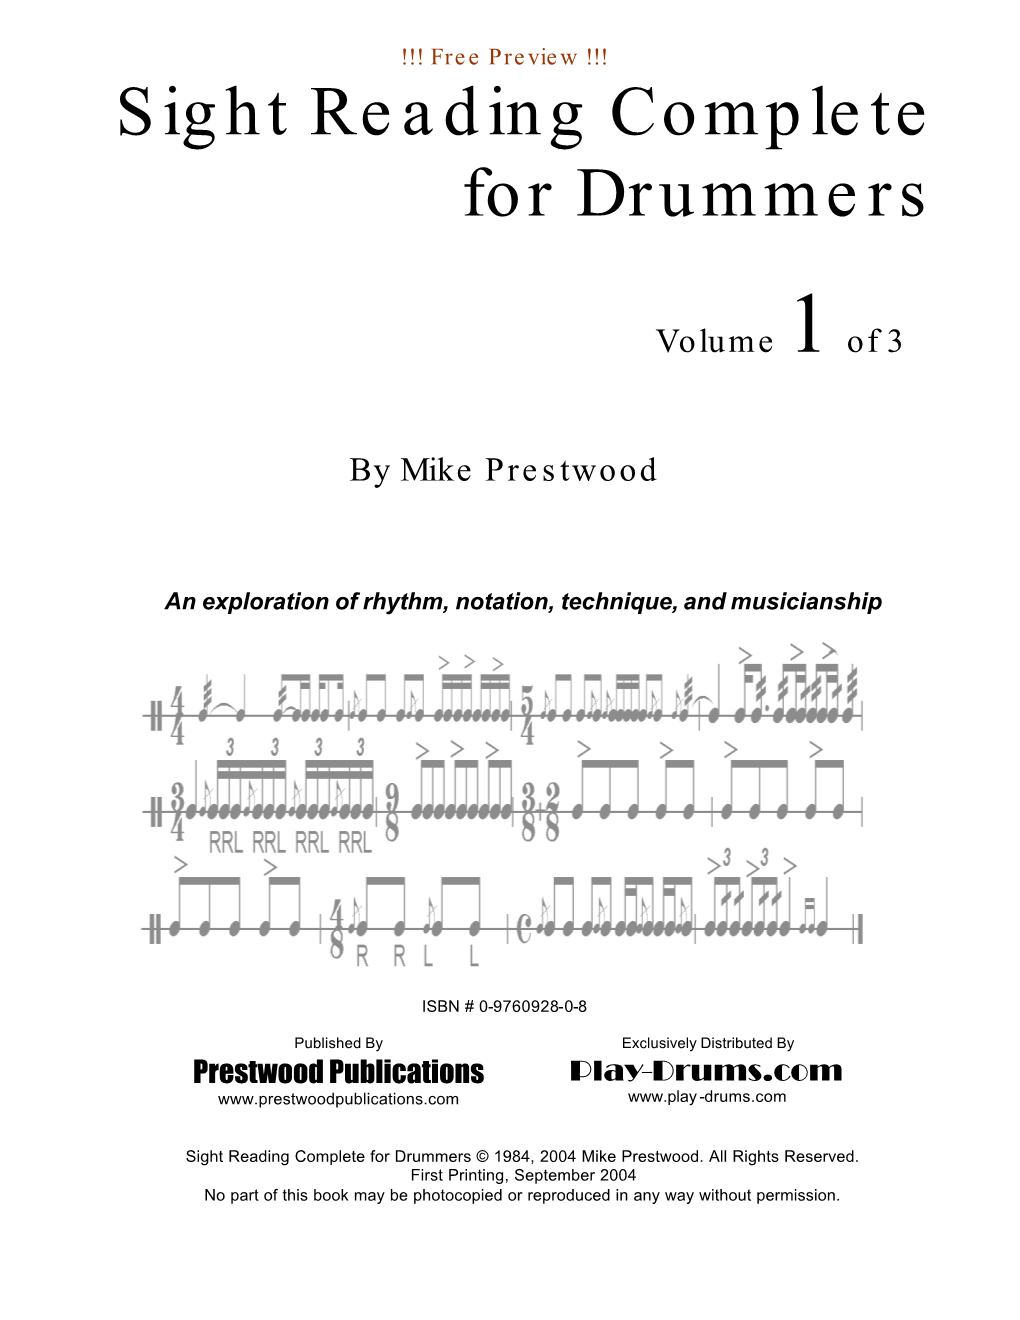 Sight Reading Complete for Drummers